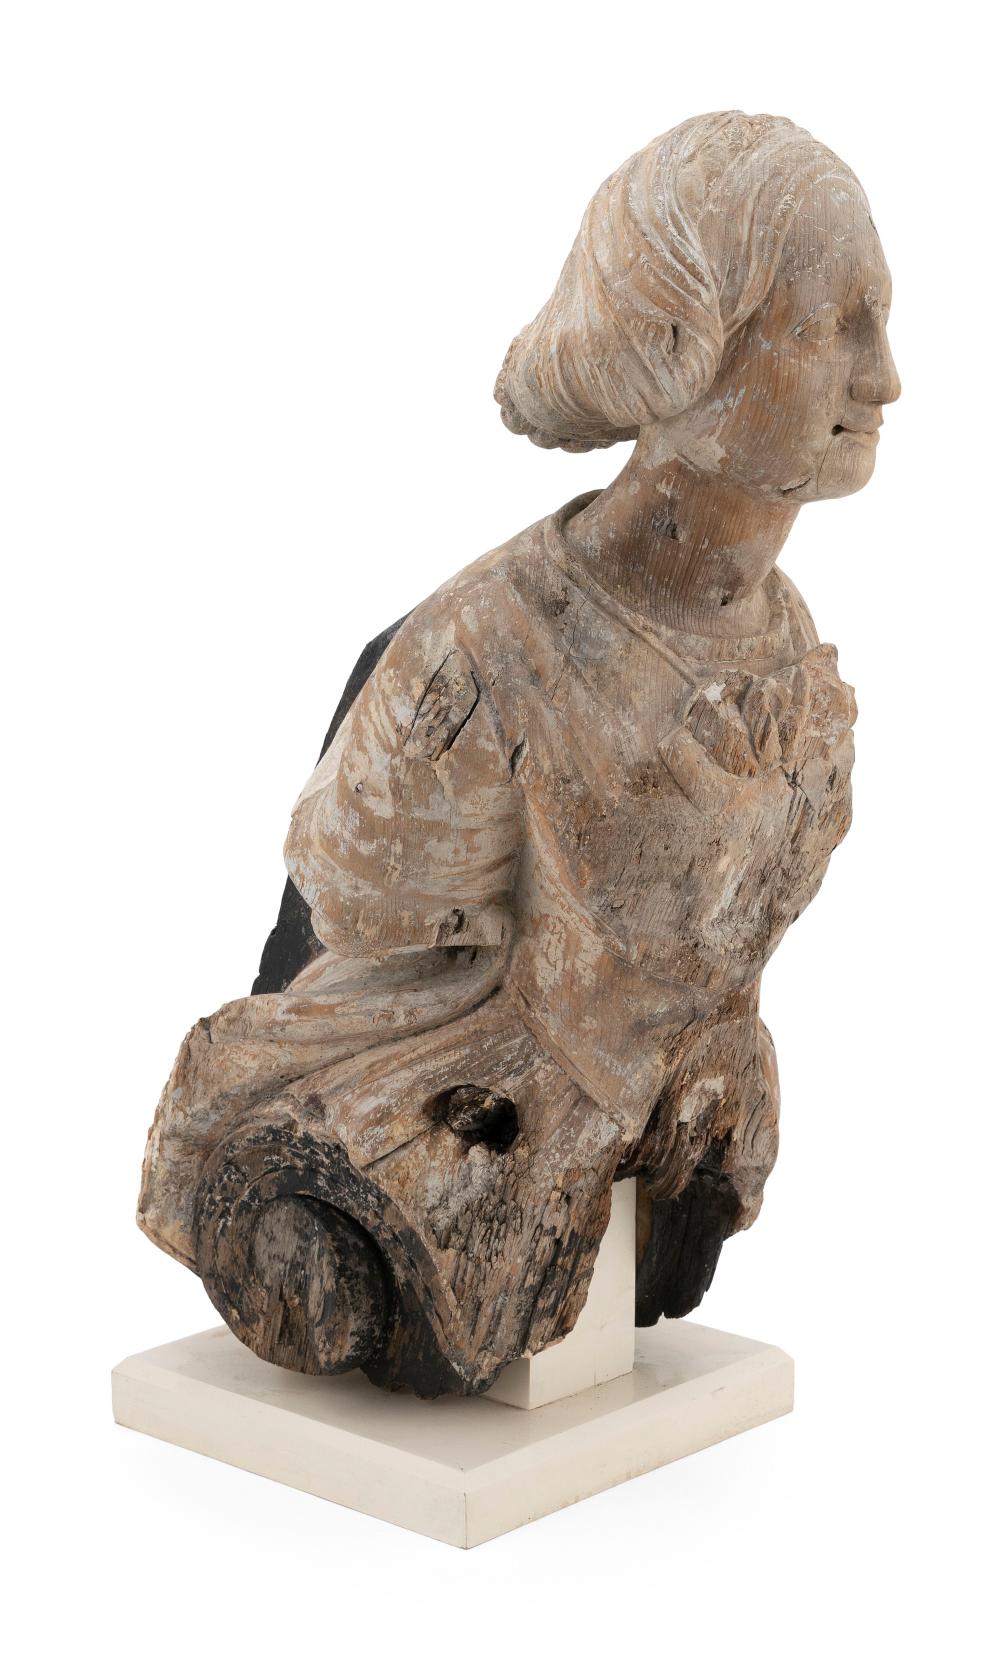 CARVED WOODEN FIGUREHEAD IN THE 34c699